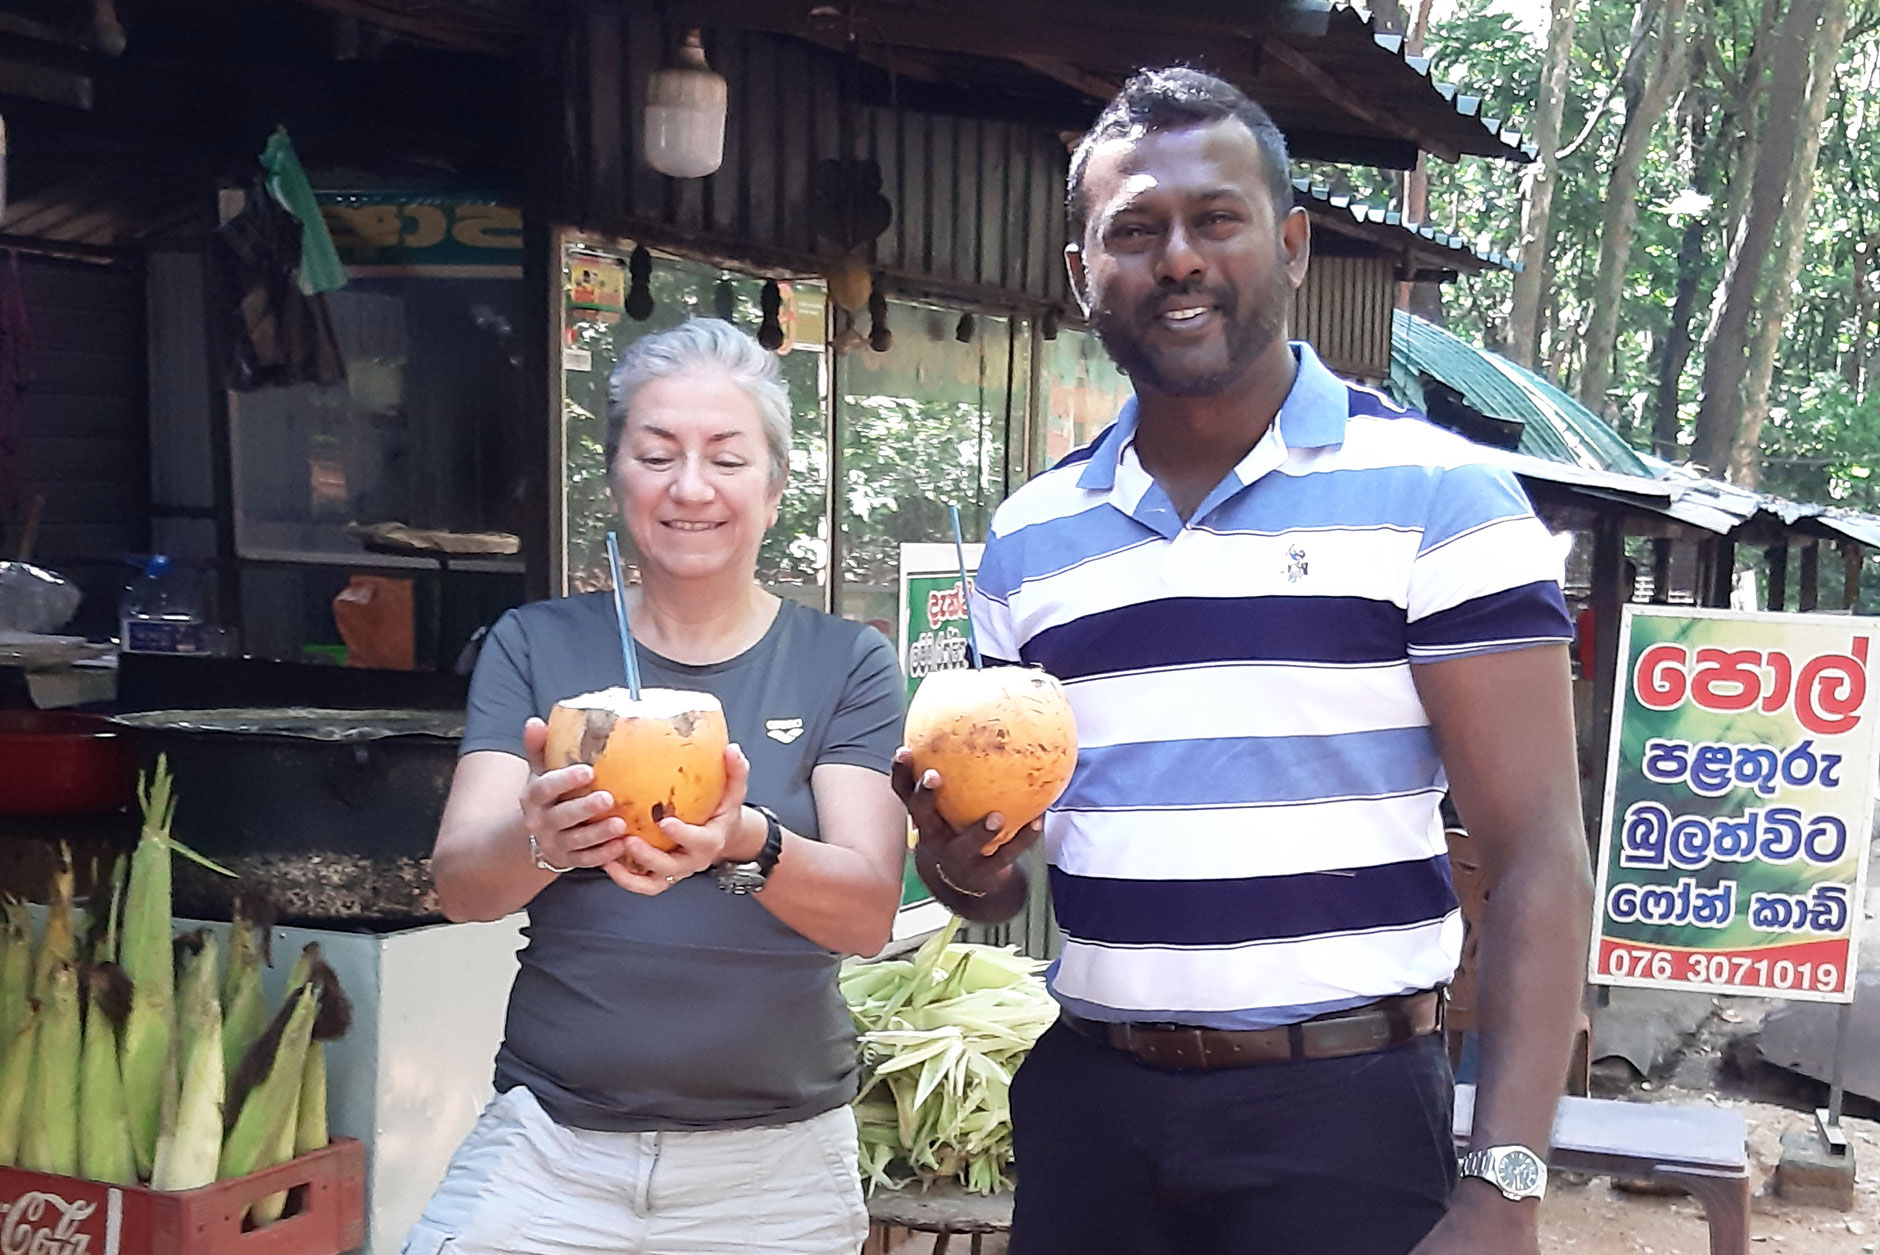 Having coconut with one guest